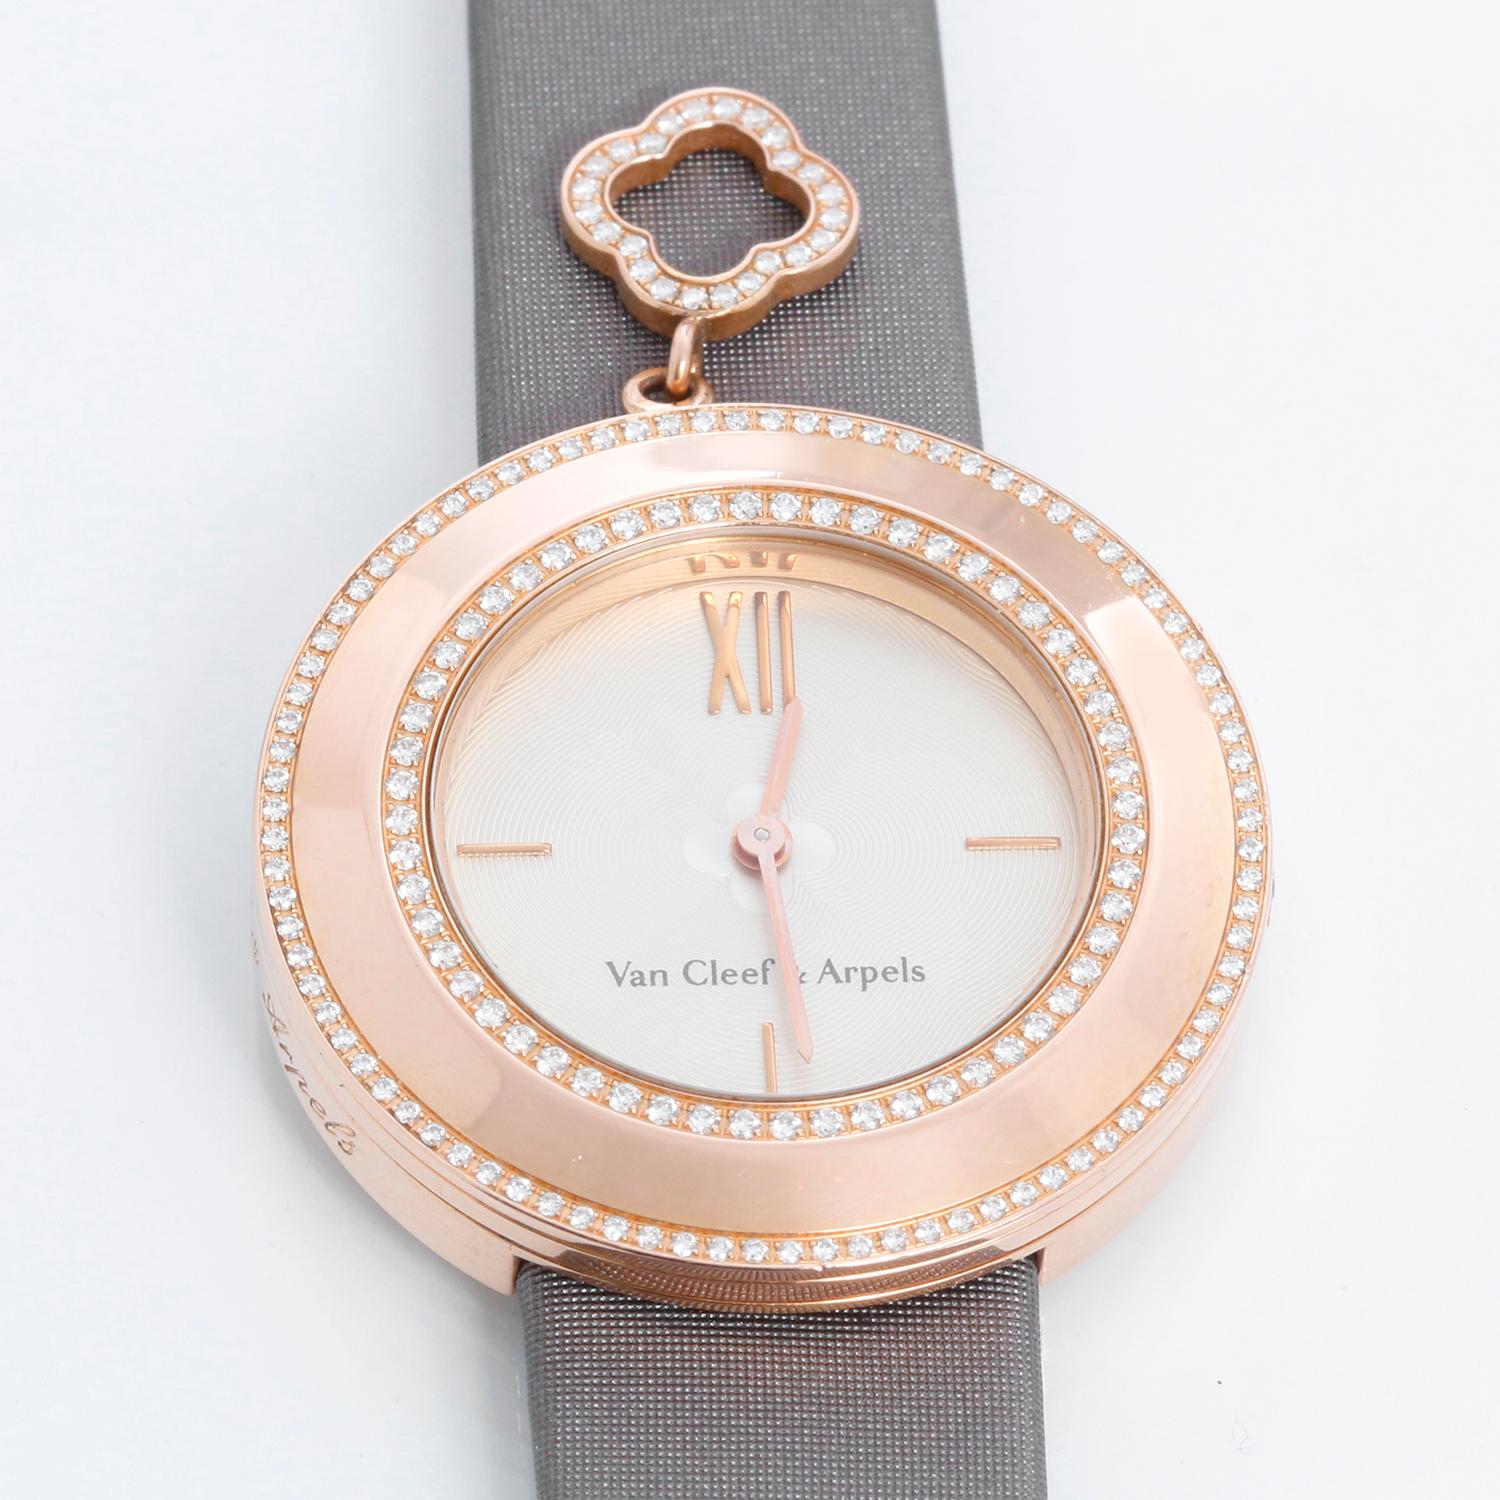 Van Cleef & Arpels Charms 18K Rose Gold Diamond Watch VCARM95000 In Excellent Condition For Sale In Dallas, TX